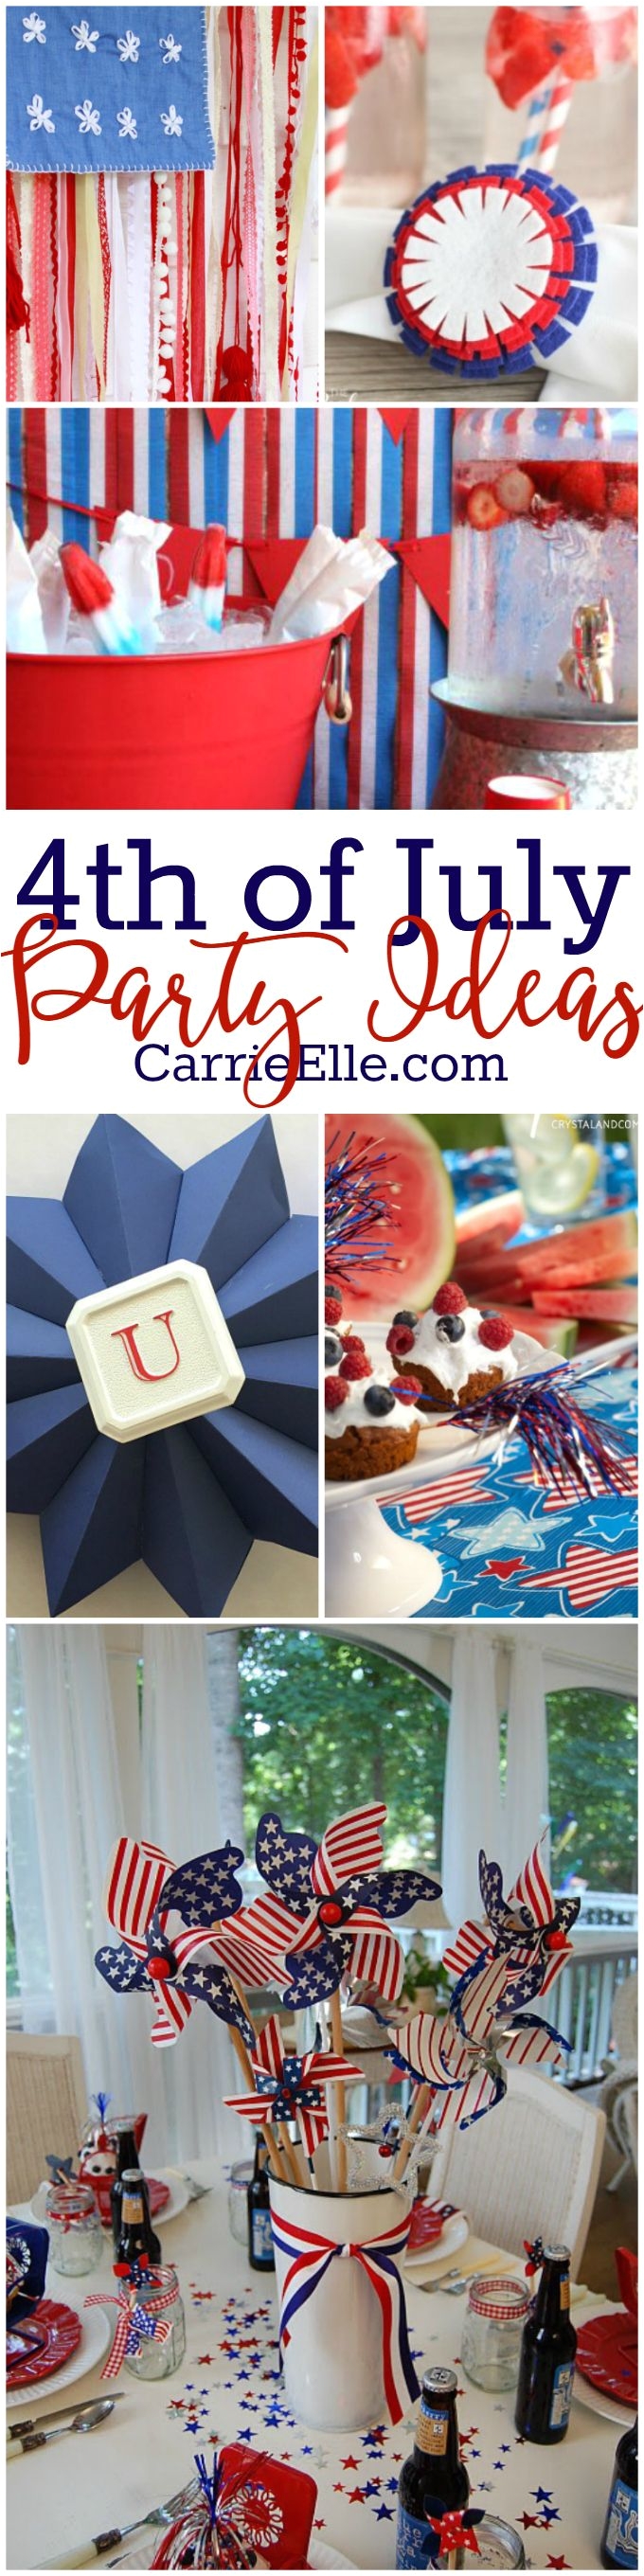 these of july party ideas cover food decorations activities and even fun printables for the kids